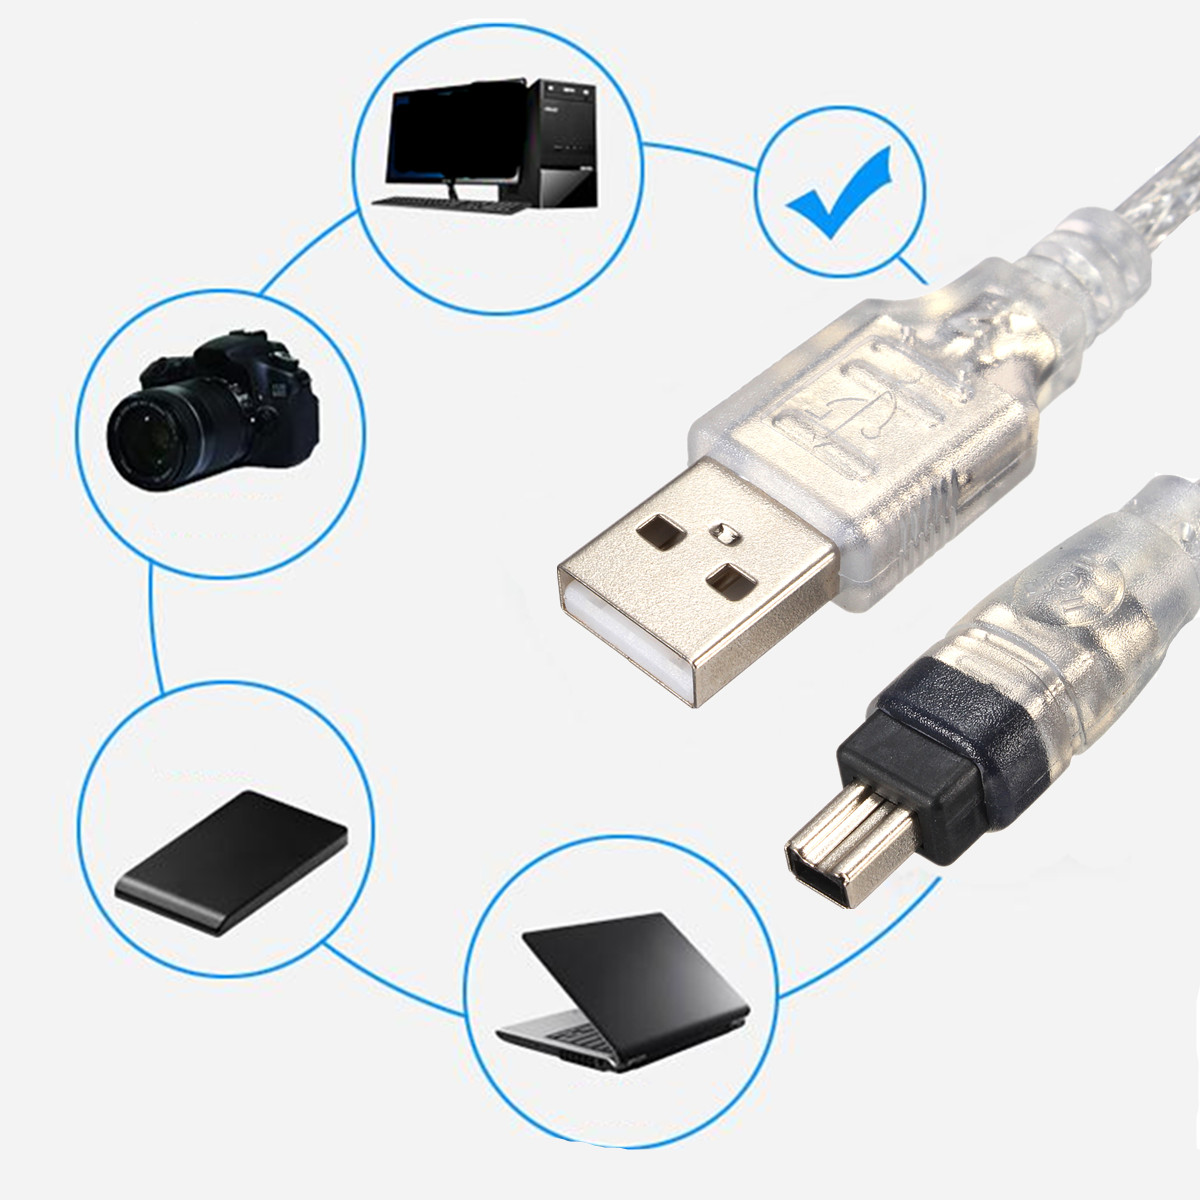 firewire ieee 1394 6 pin male to usb 3.0 cable